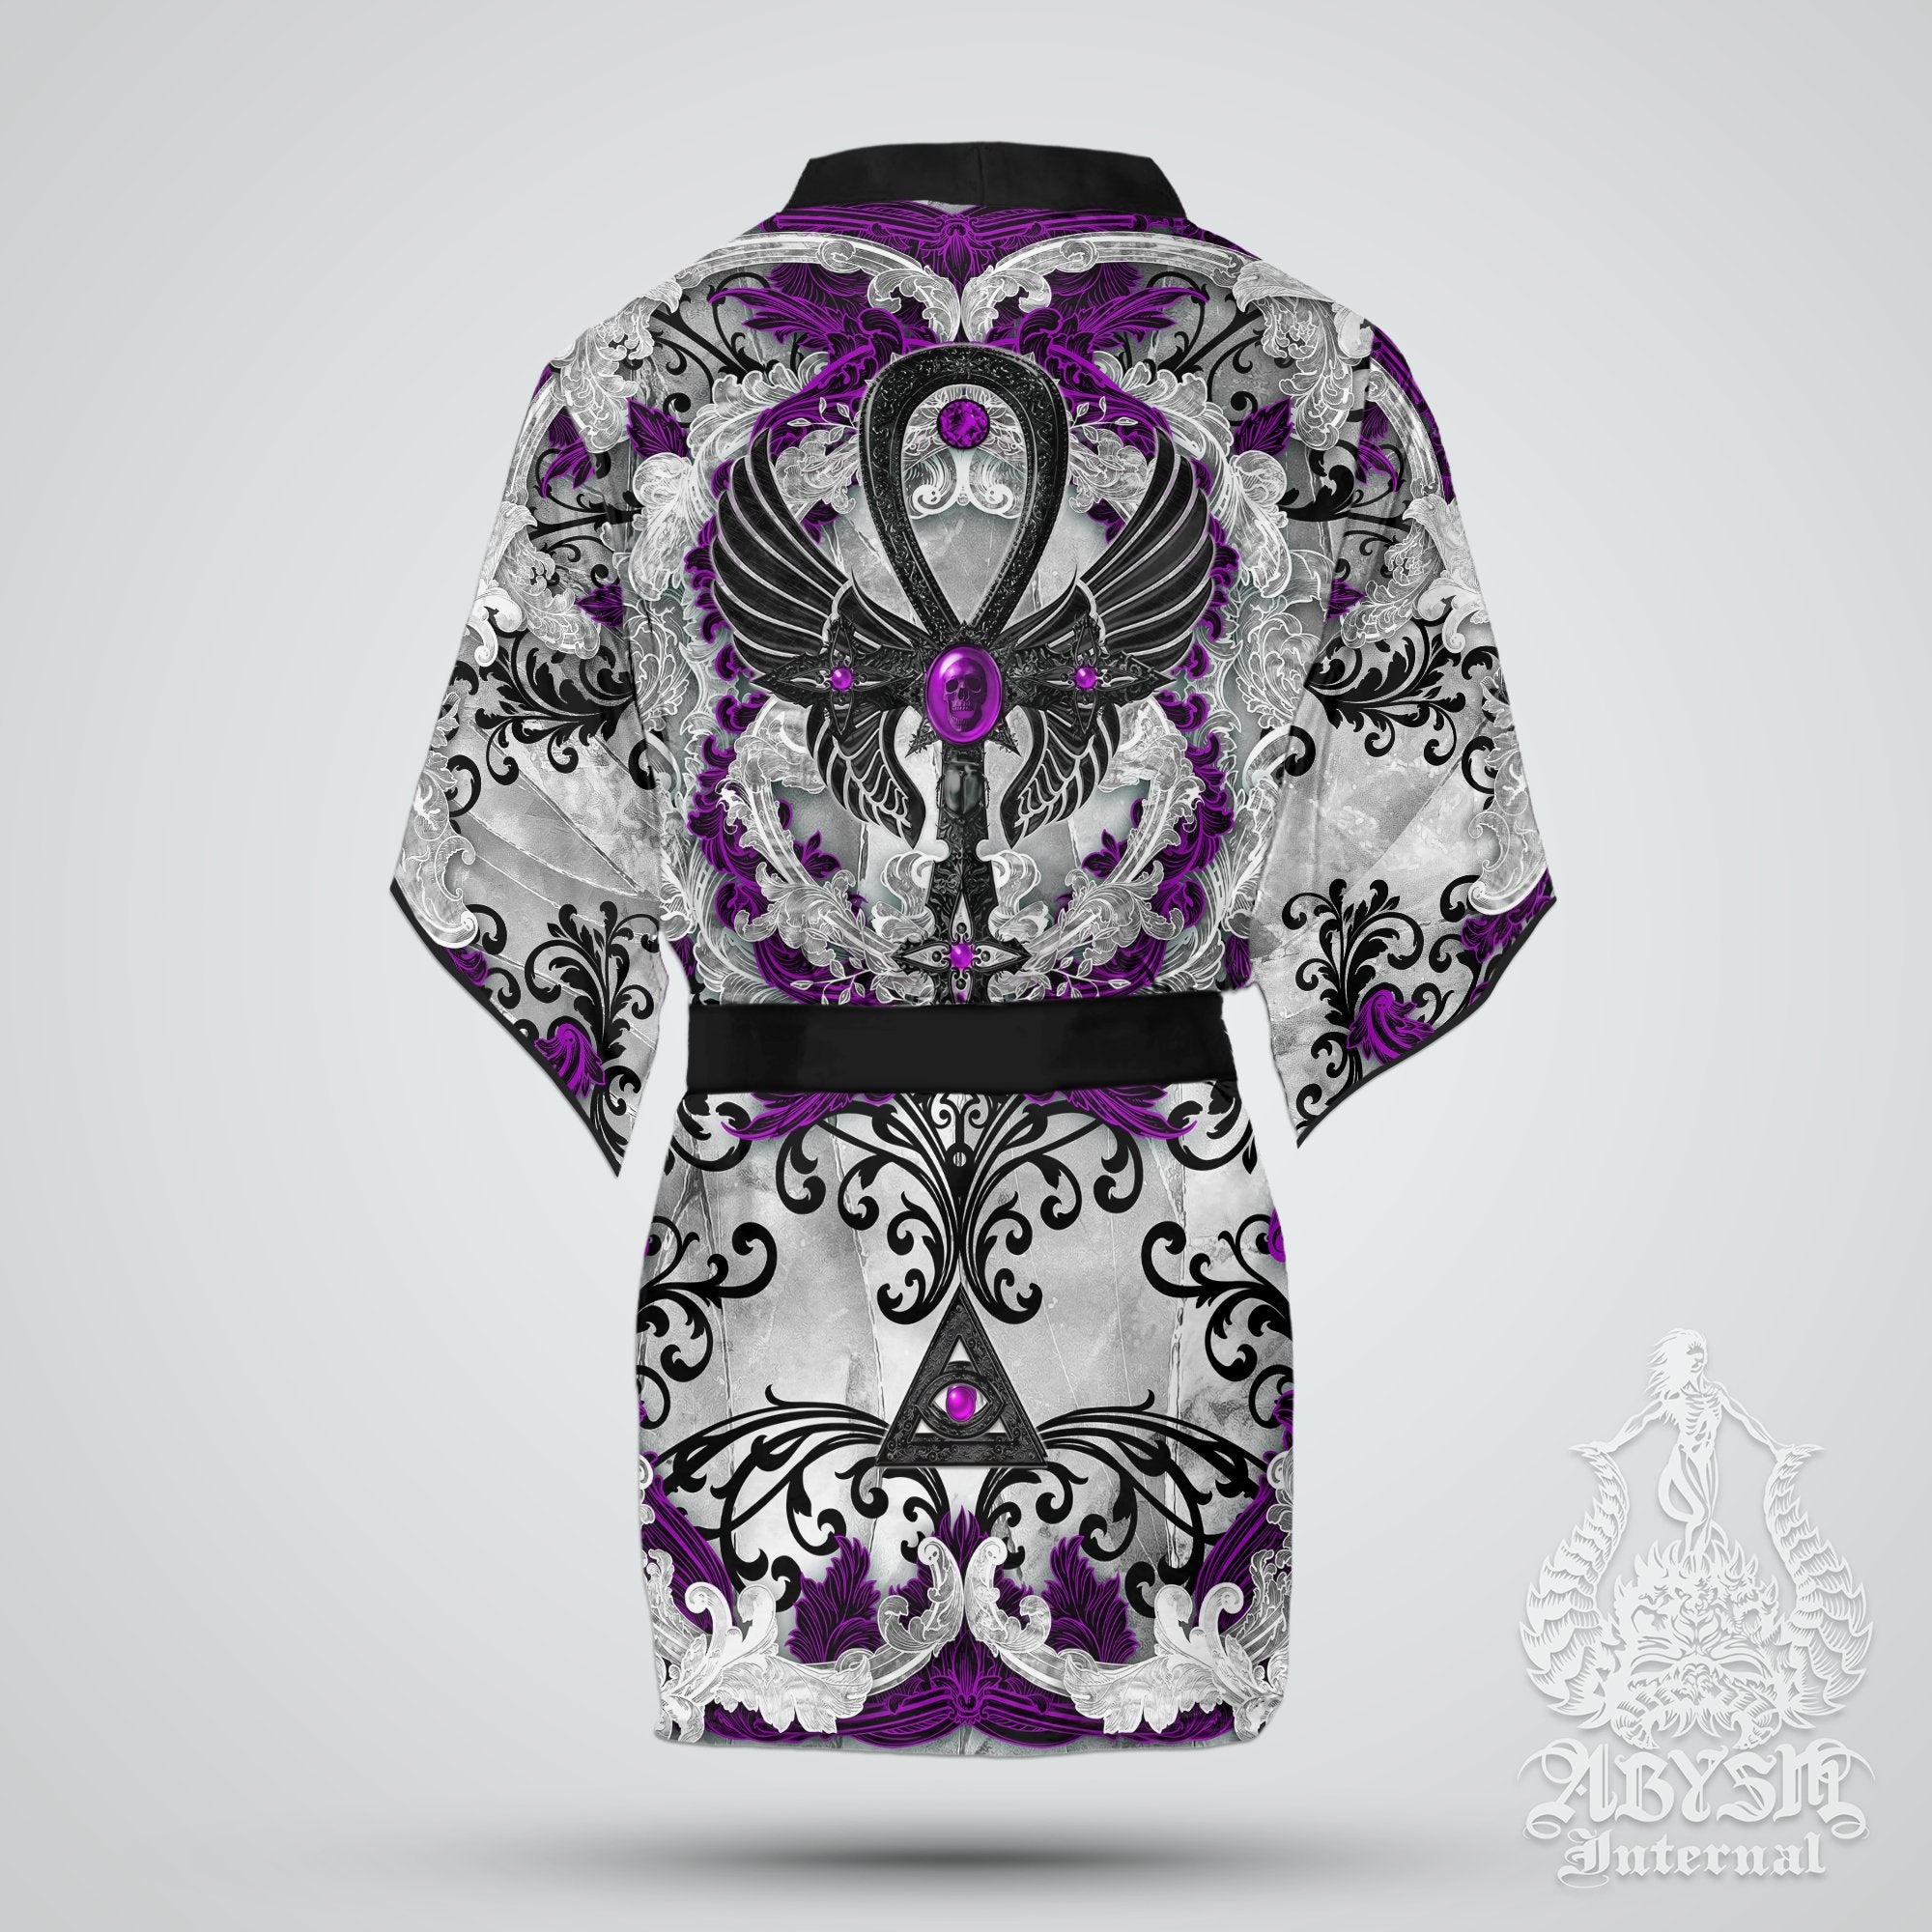 White Goth Cover Up, Beach Outfit, Party Kimono, Gothic Summer Festival Robe, Indie and Alternative Clothing, Unisex - Ankh, Black Purple - Abysm Internal